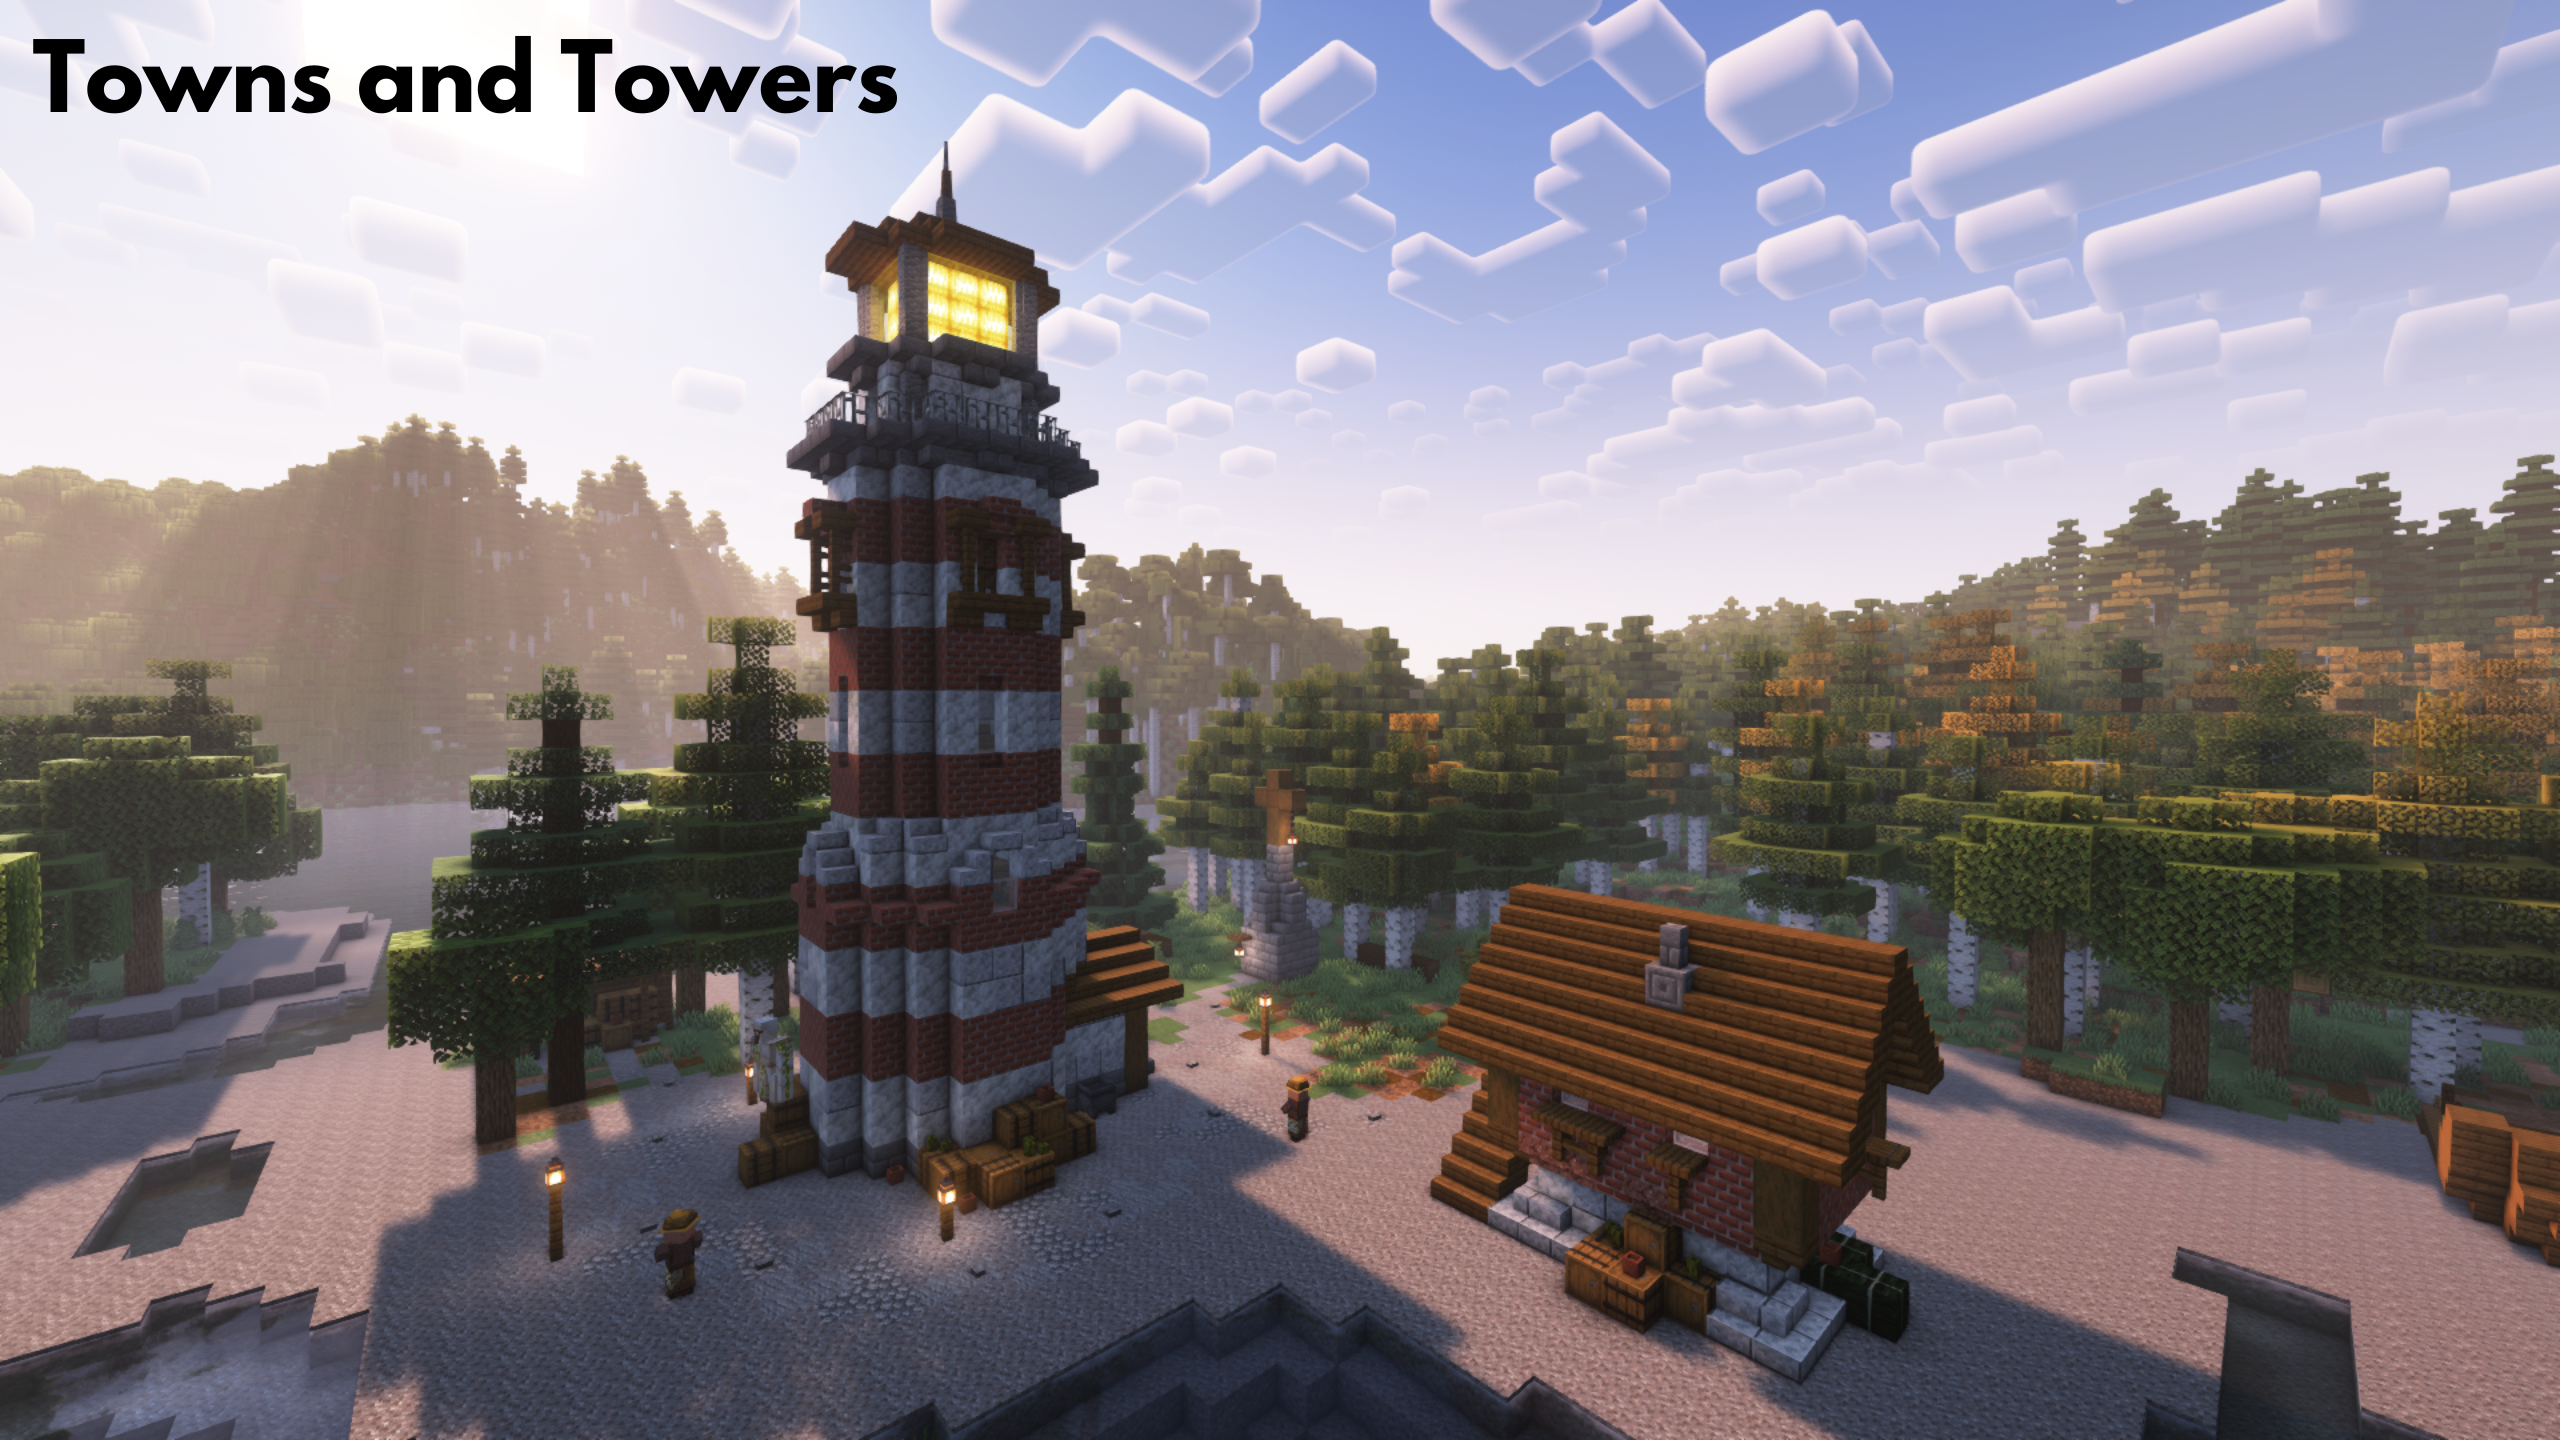 Towns and Towers